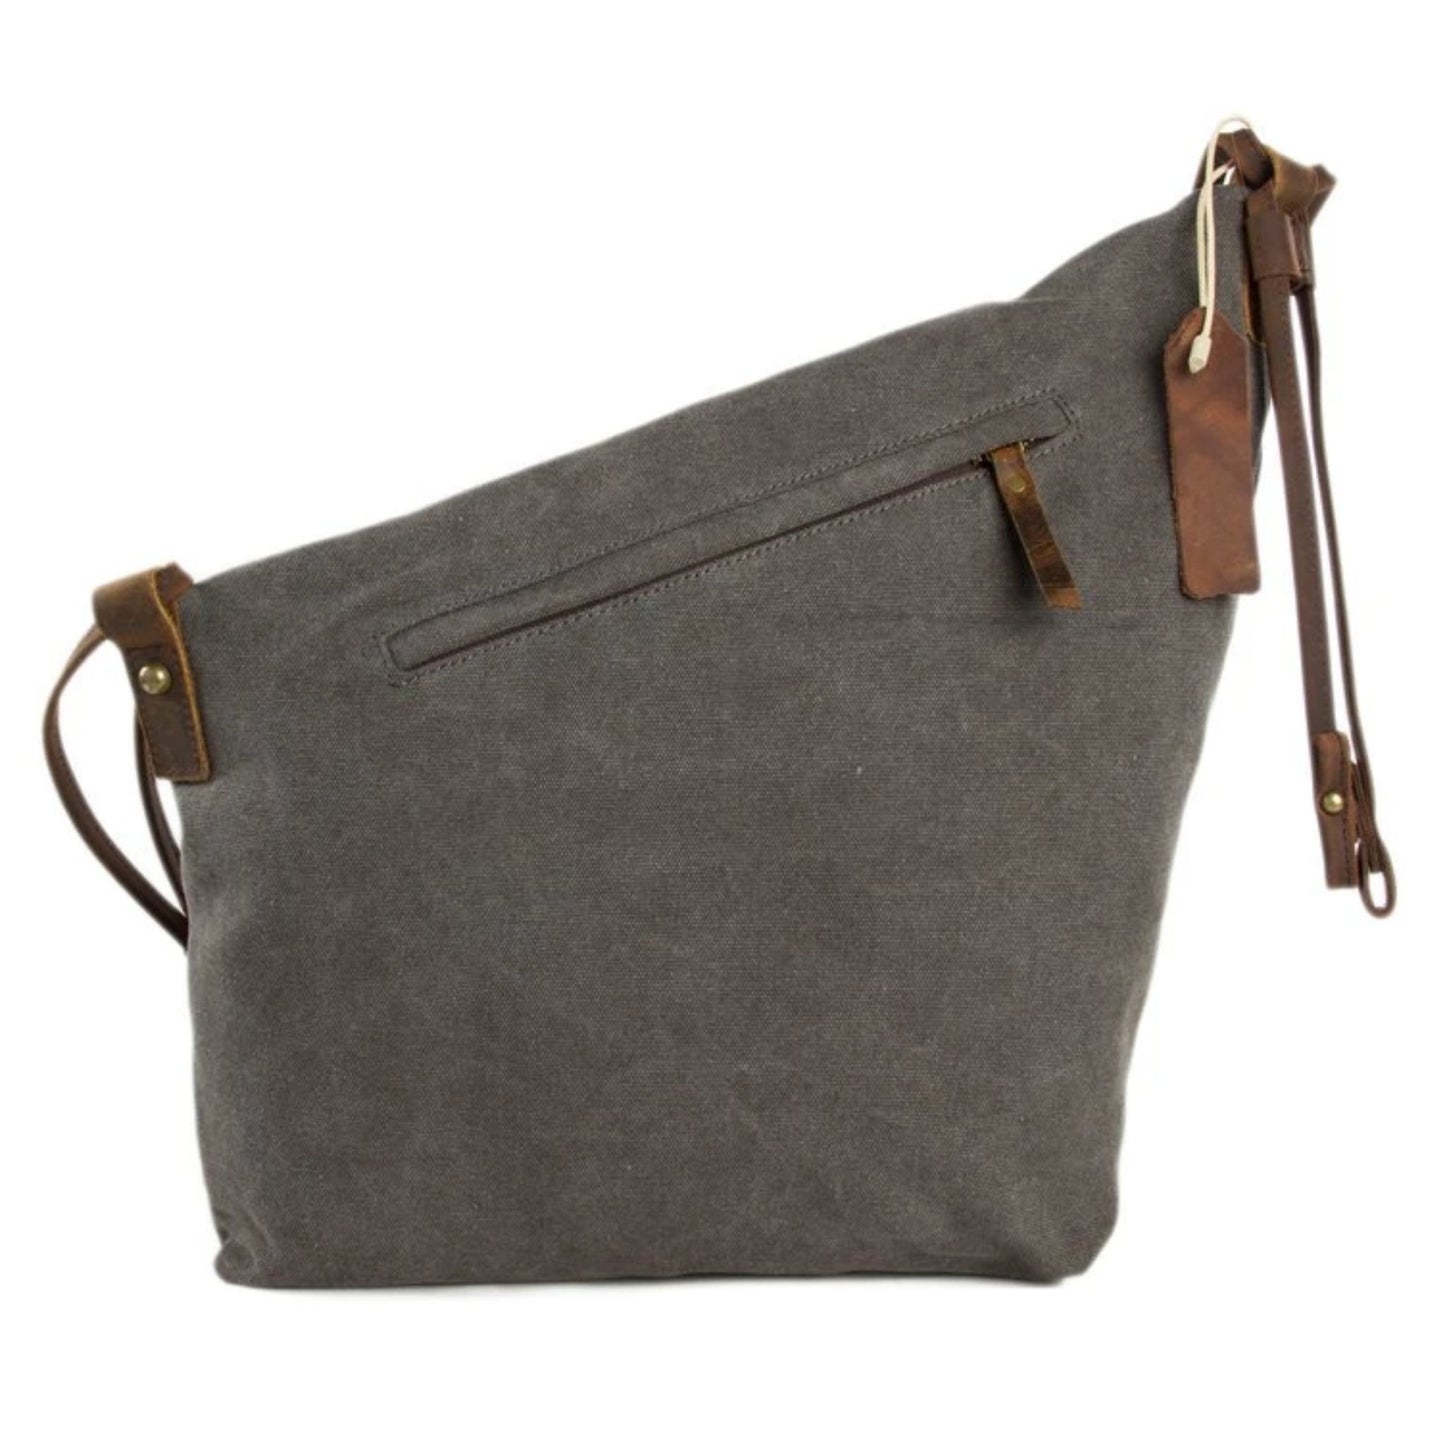 Waxed Canvas with Leather Strap Sling Bag - Dark Grey - Blue Sebe Handmade Leather Bags